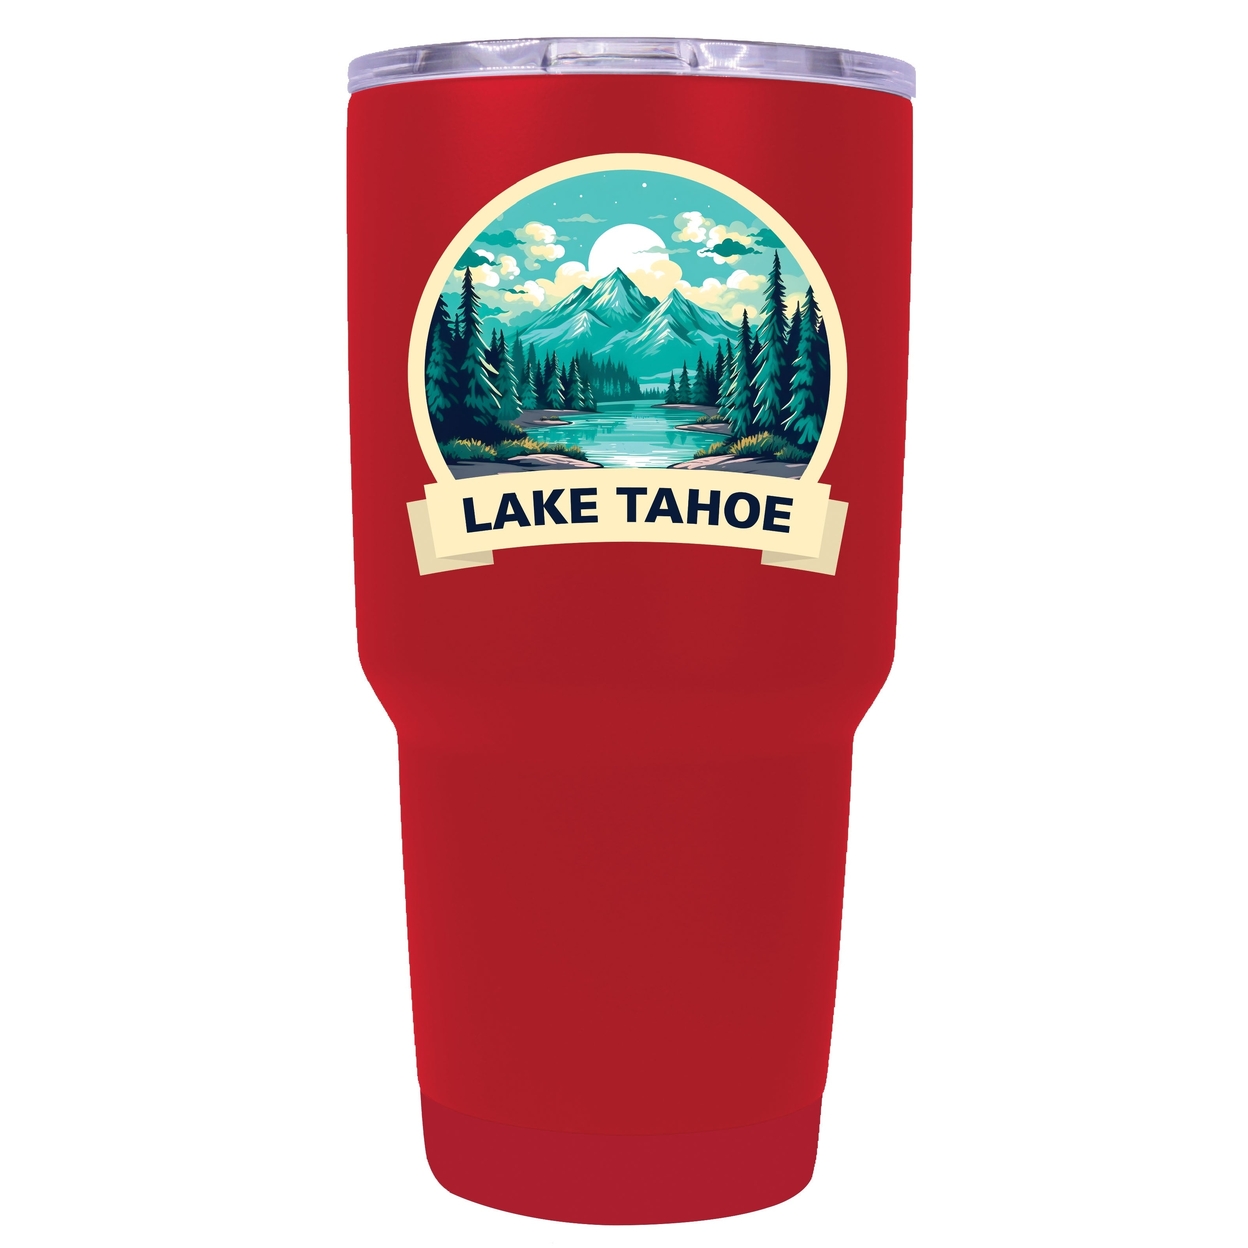 Lake Tahoe California Souvenir 24 Oz Insulated Stainless Steel Tumbler - Red,,2-Pack